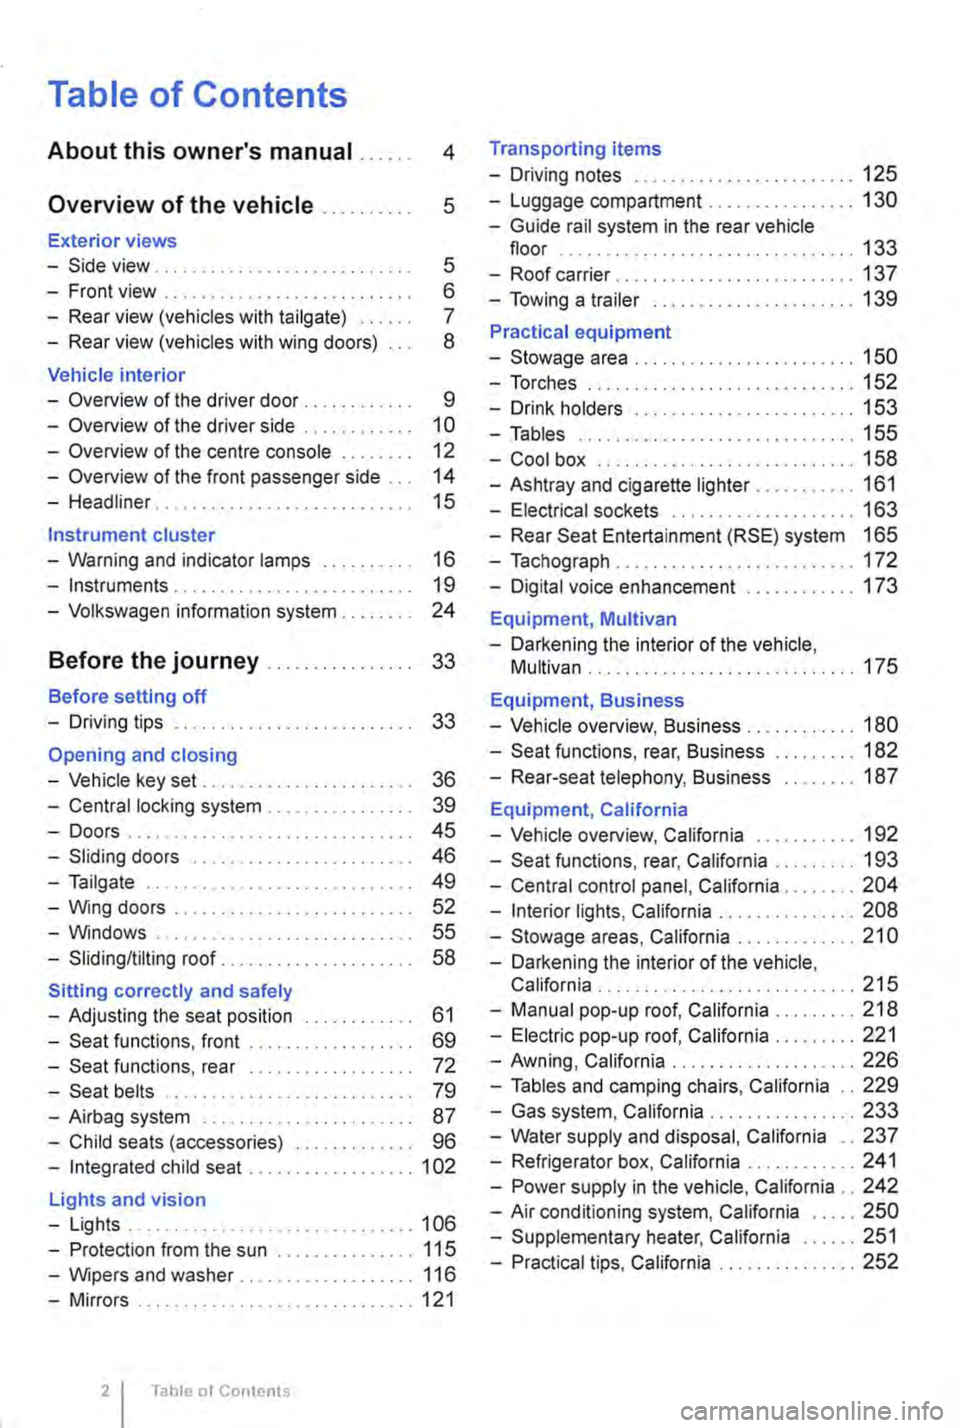 VOLKSWAGEN TRANSPORTER 2016  Owners Manual Table of Contents 
About this owners manual . . . . . . 4 
Overview of the vehicle . . . . . . . . . . 5 
Exterior views 
-Side view . . . . . . . . . . . . . . . . . . . . . . . . . . . . 5 
-Front 